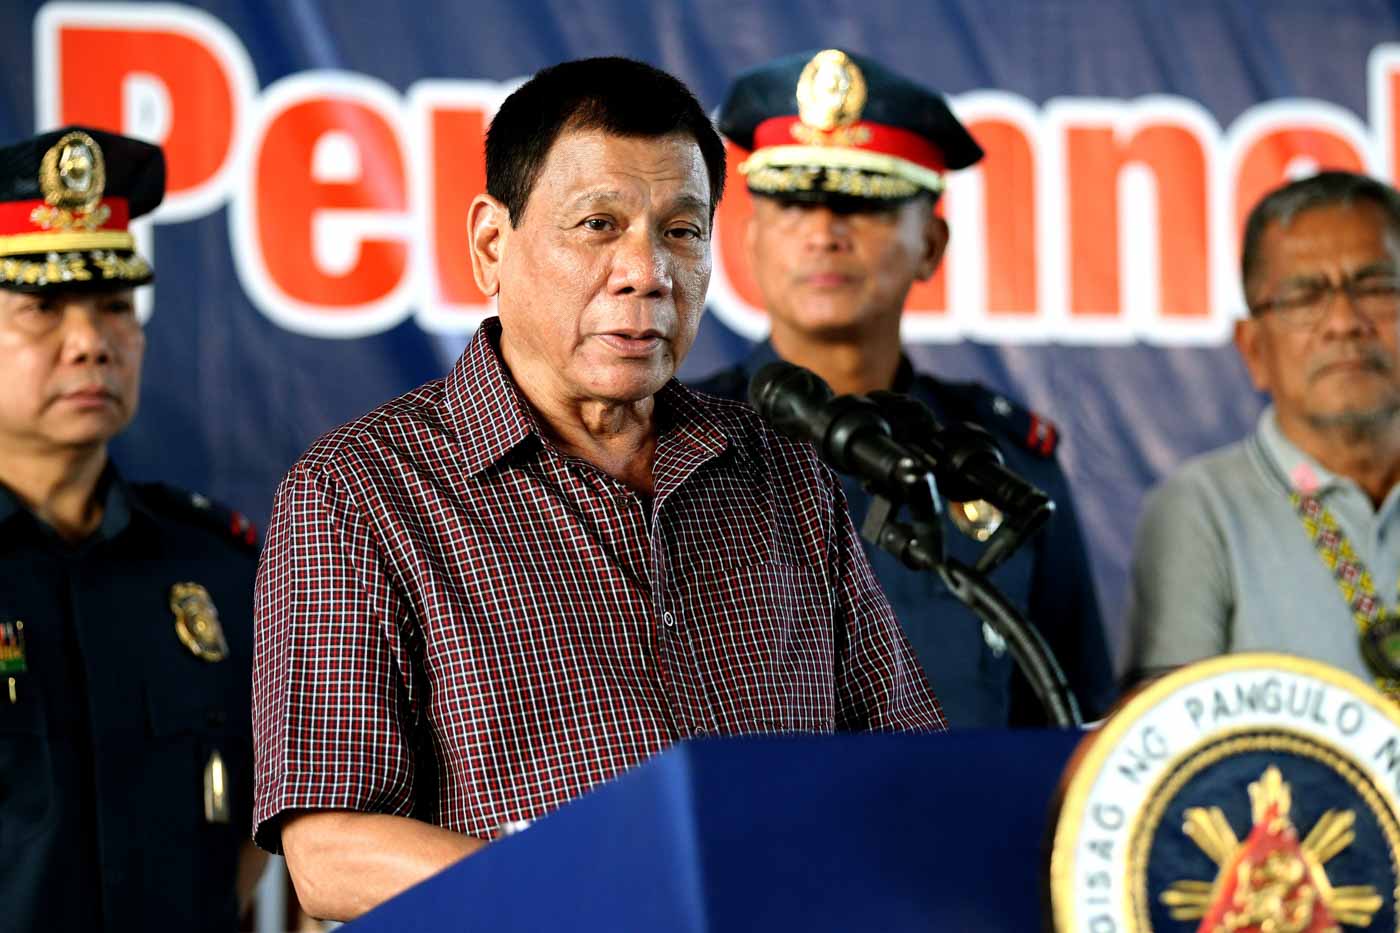 CHIEF EXECUTIVE. President Rodrigo Duterte delivers a message during his visit to the Police Regional Office-12 Headquarters in General Santos City on September 23, 2016. File photo by Karl Norman Alonzo/PPD   